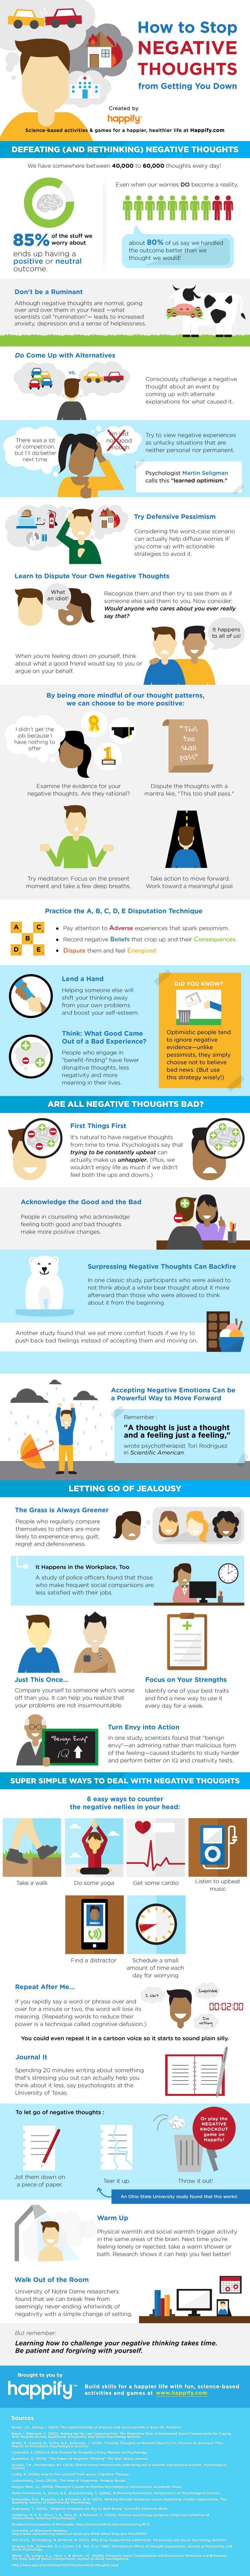 How To Stop Negative Thoughts From Getting You Down